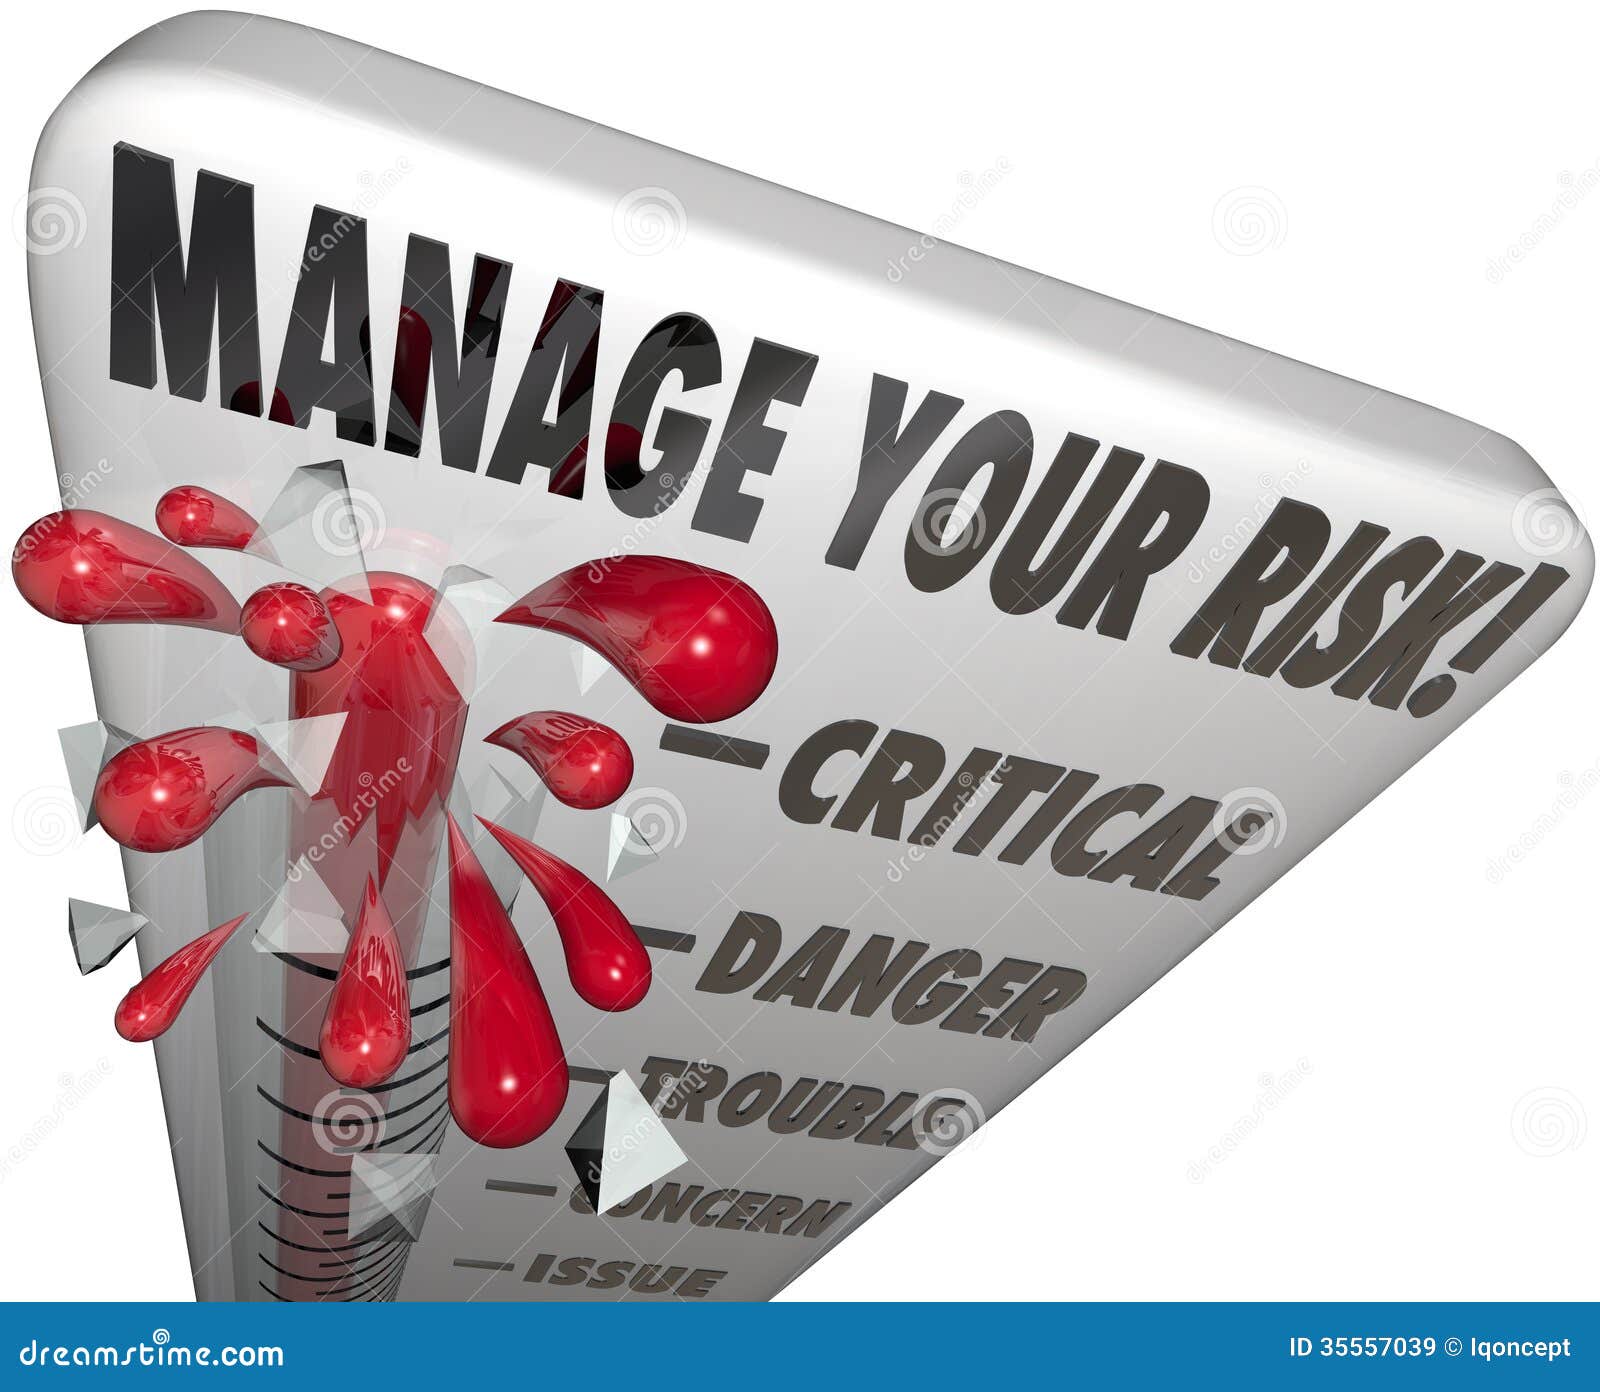 business risk clipart - photo #14